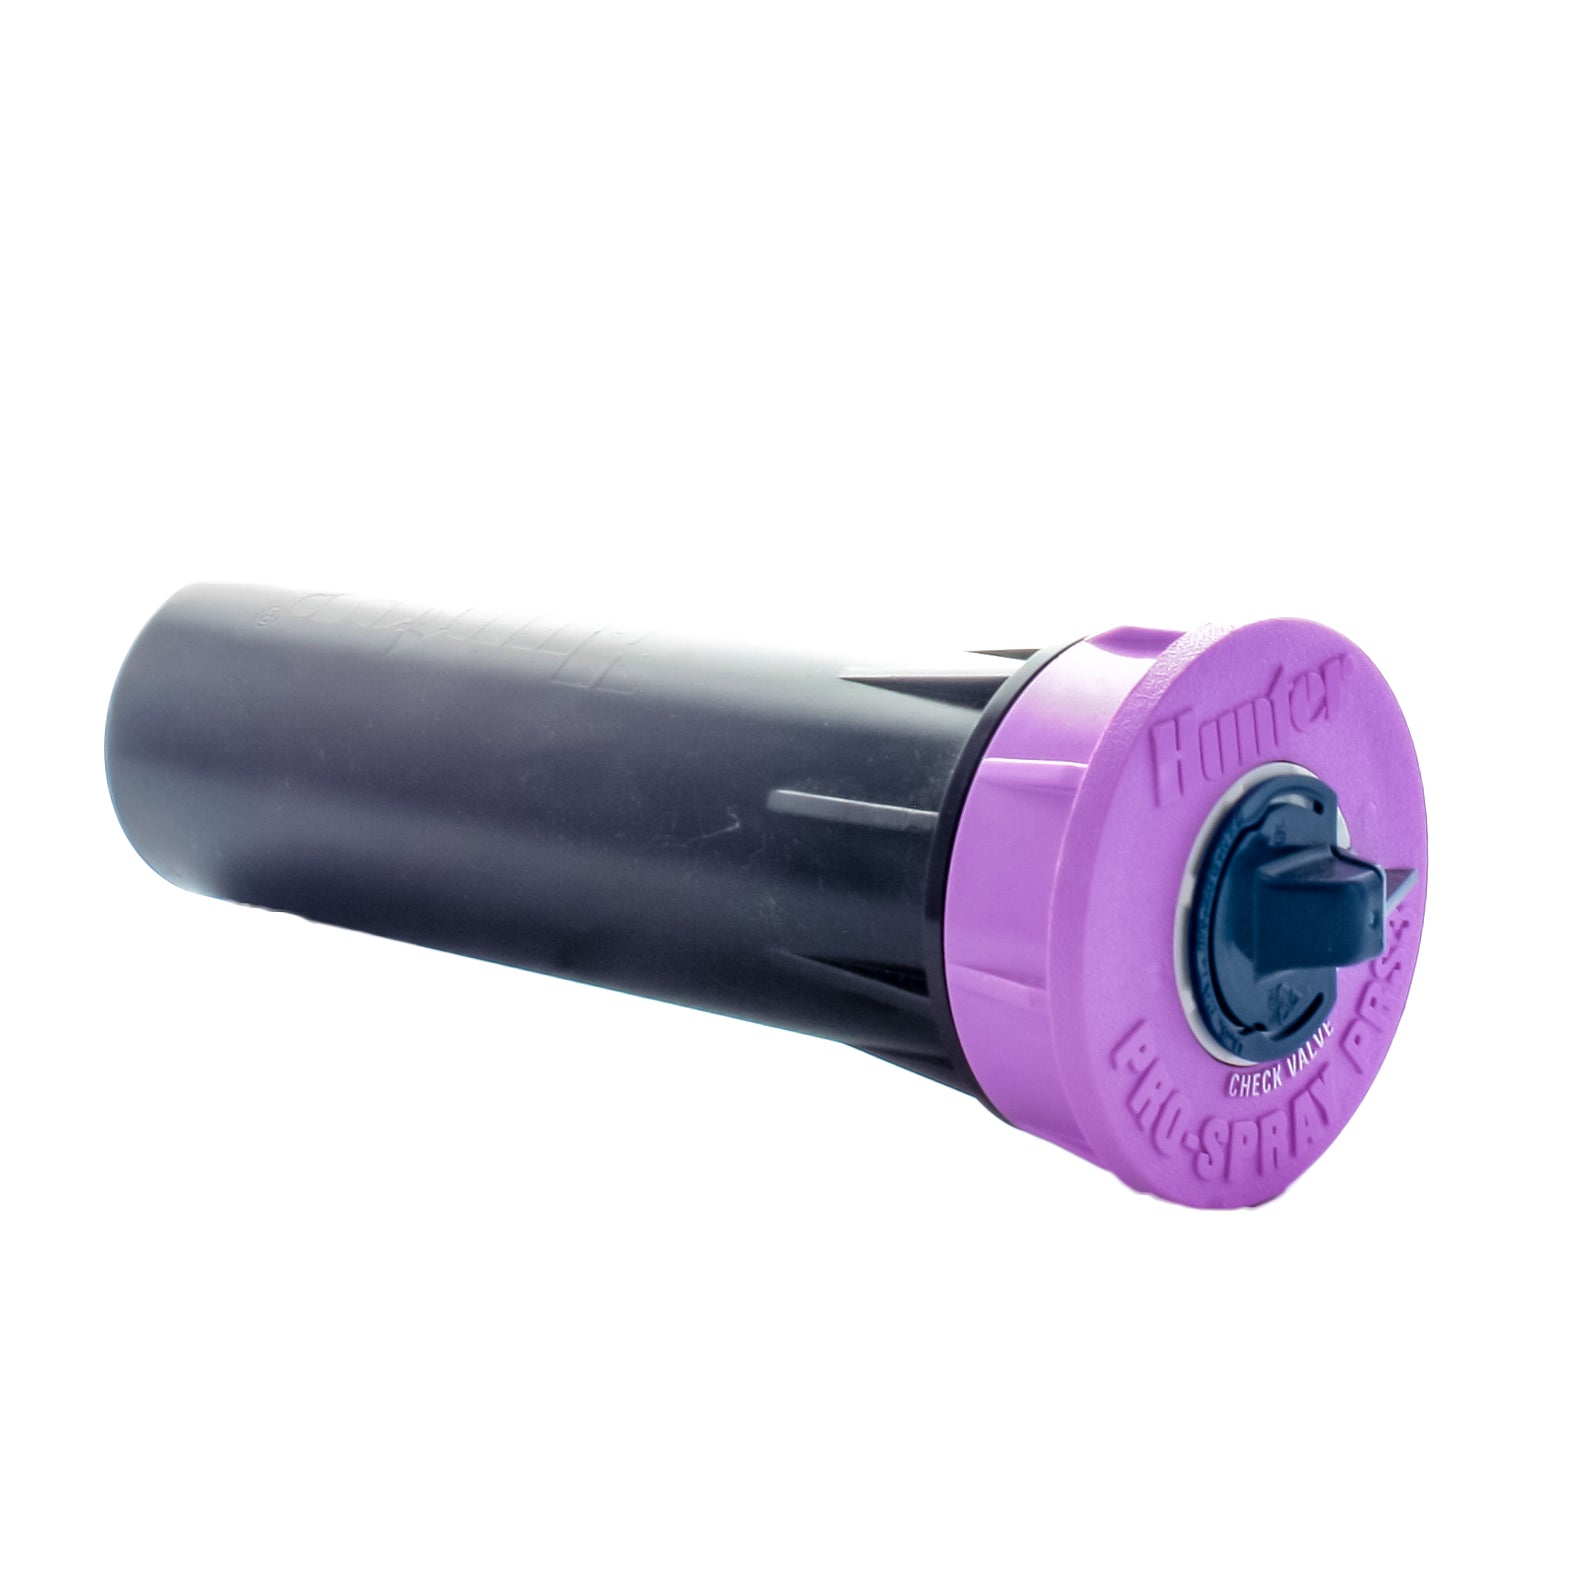 Hunter - PROS-04-PRS30-CV-R - 30 PSI Regulated 4 in. Pop-up Spray; with Check Valve & Reclaimed Water ID logo cap (Purple)